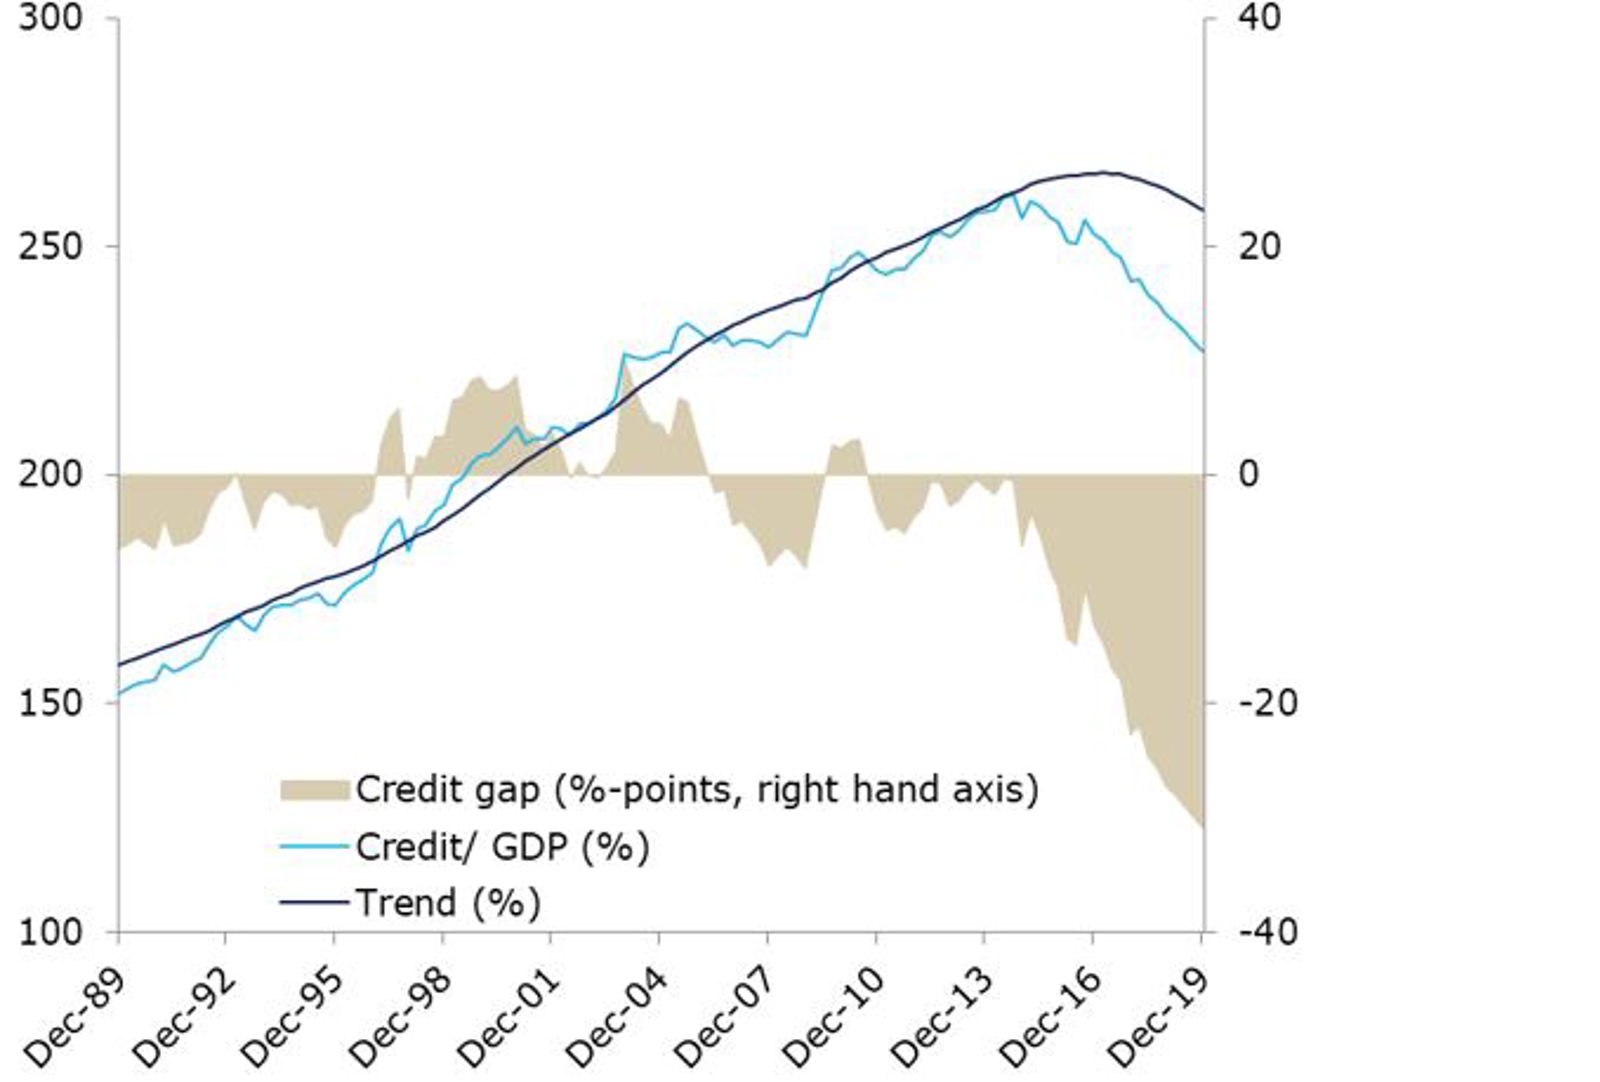 Chart 1: The credit gap for the Netherlands